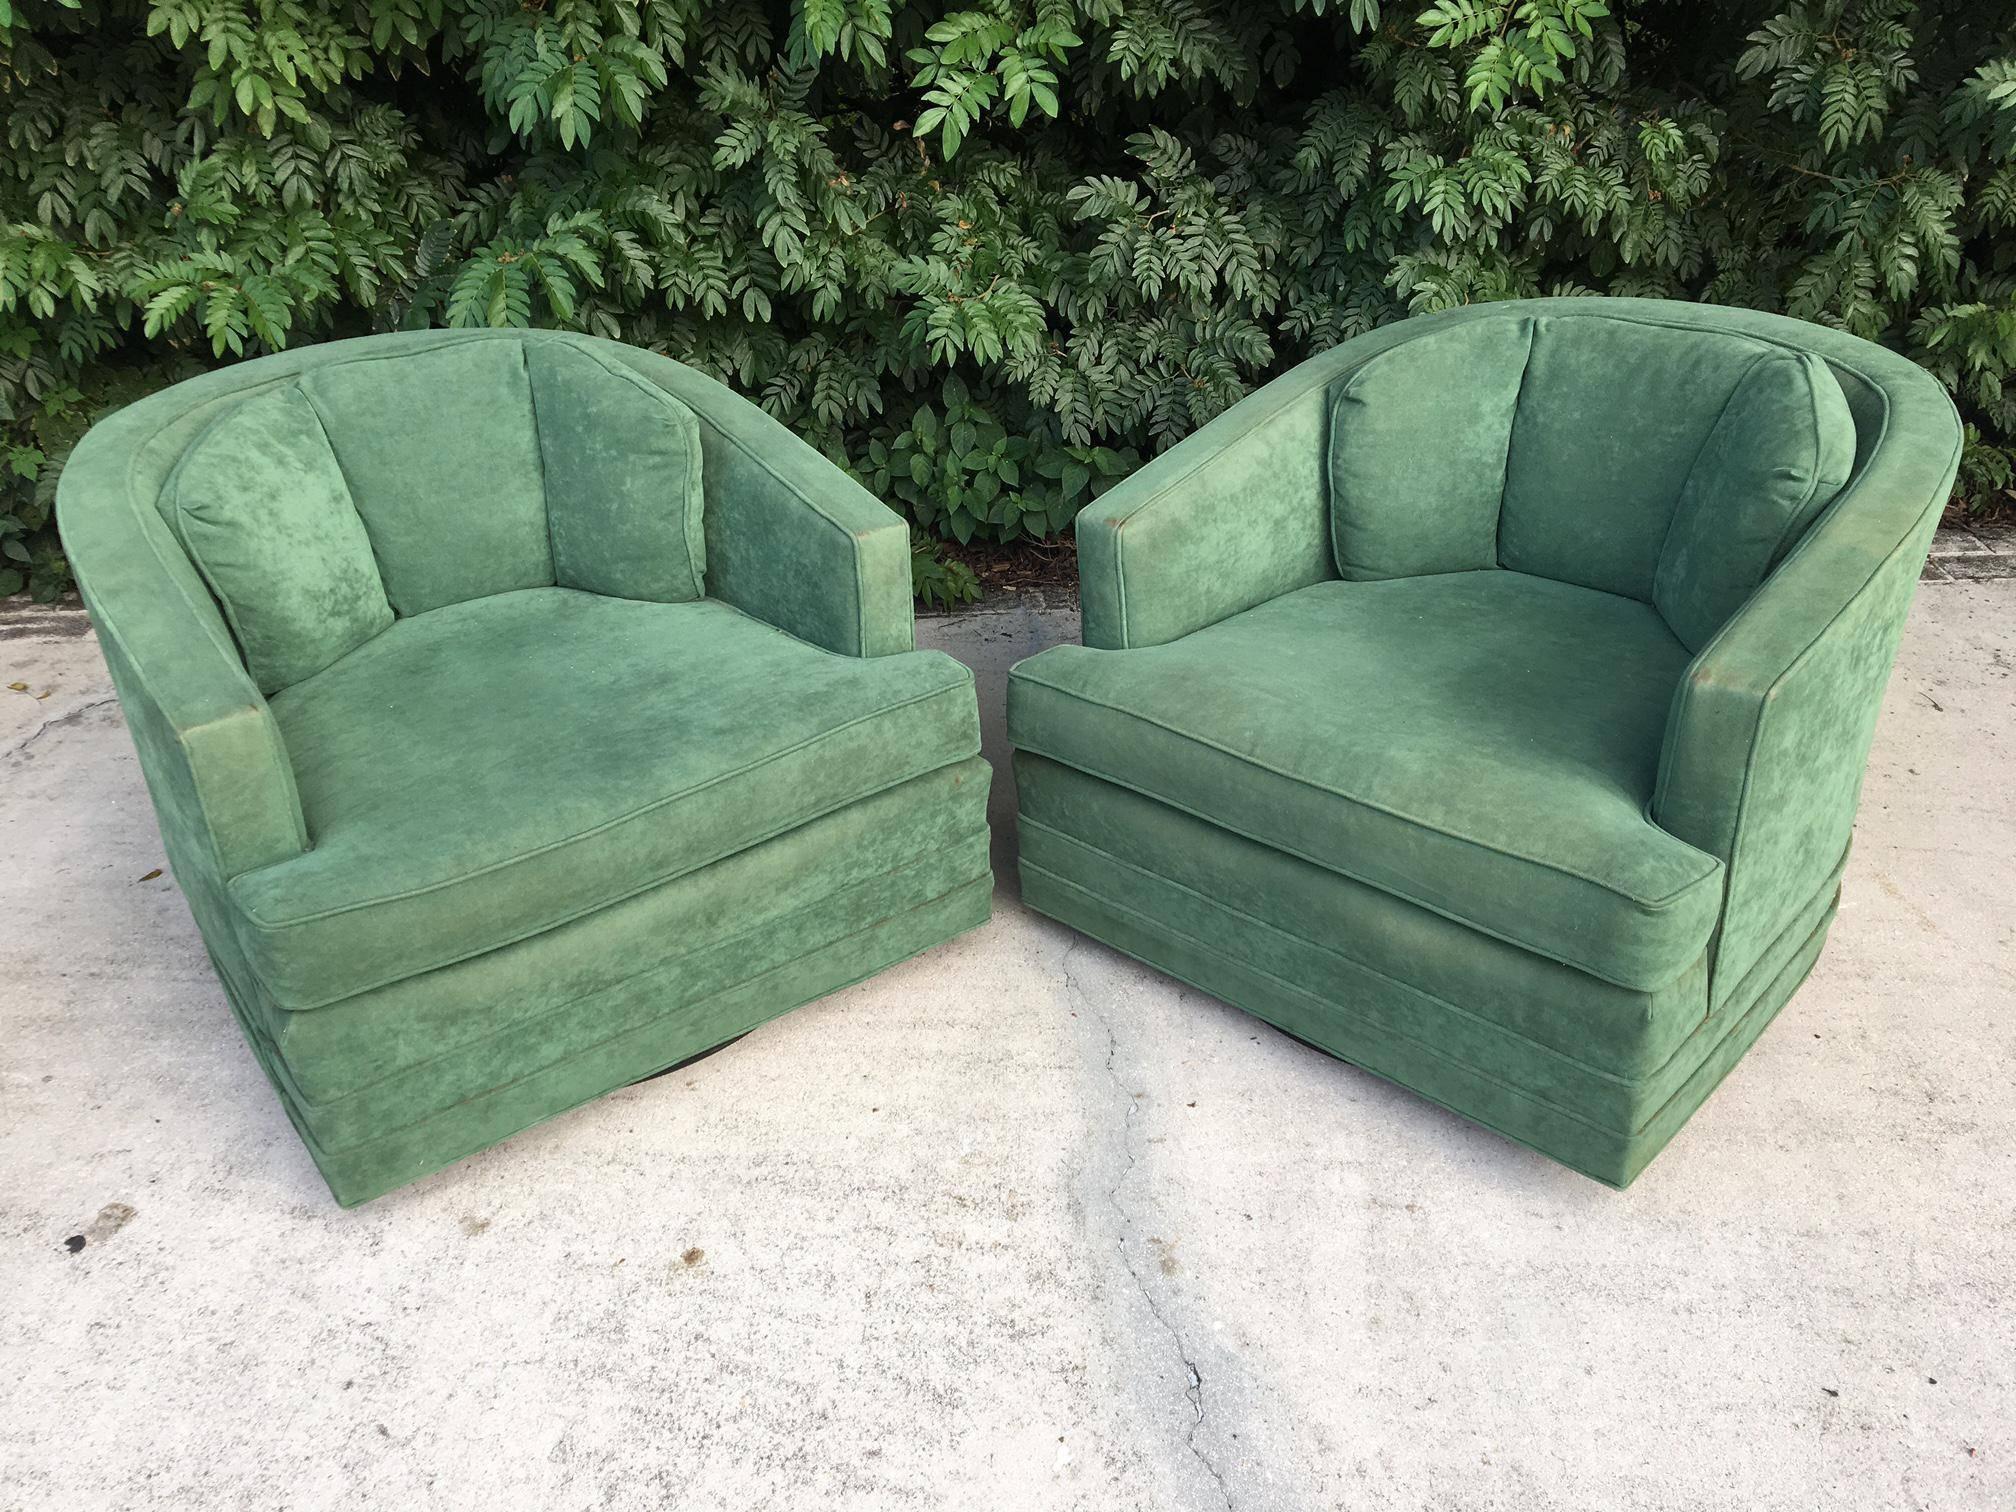 Pair of green velvet swivel club chairs ready to complete your Hollywood Regency decor. Round plinth base. By Kaylyn Inc. of High Point, NC, circa 1970s. Excellent vintage condition with minor discoloration.